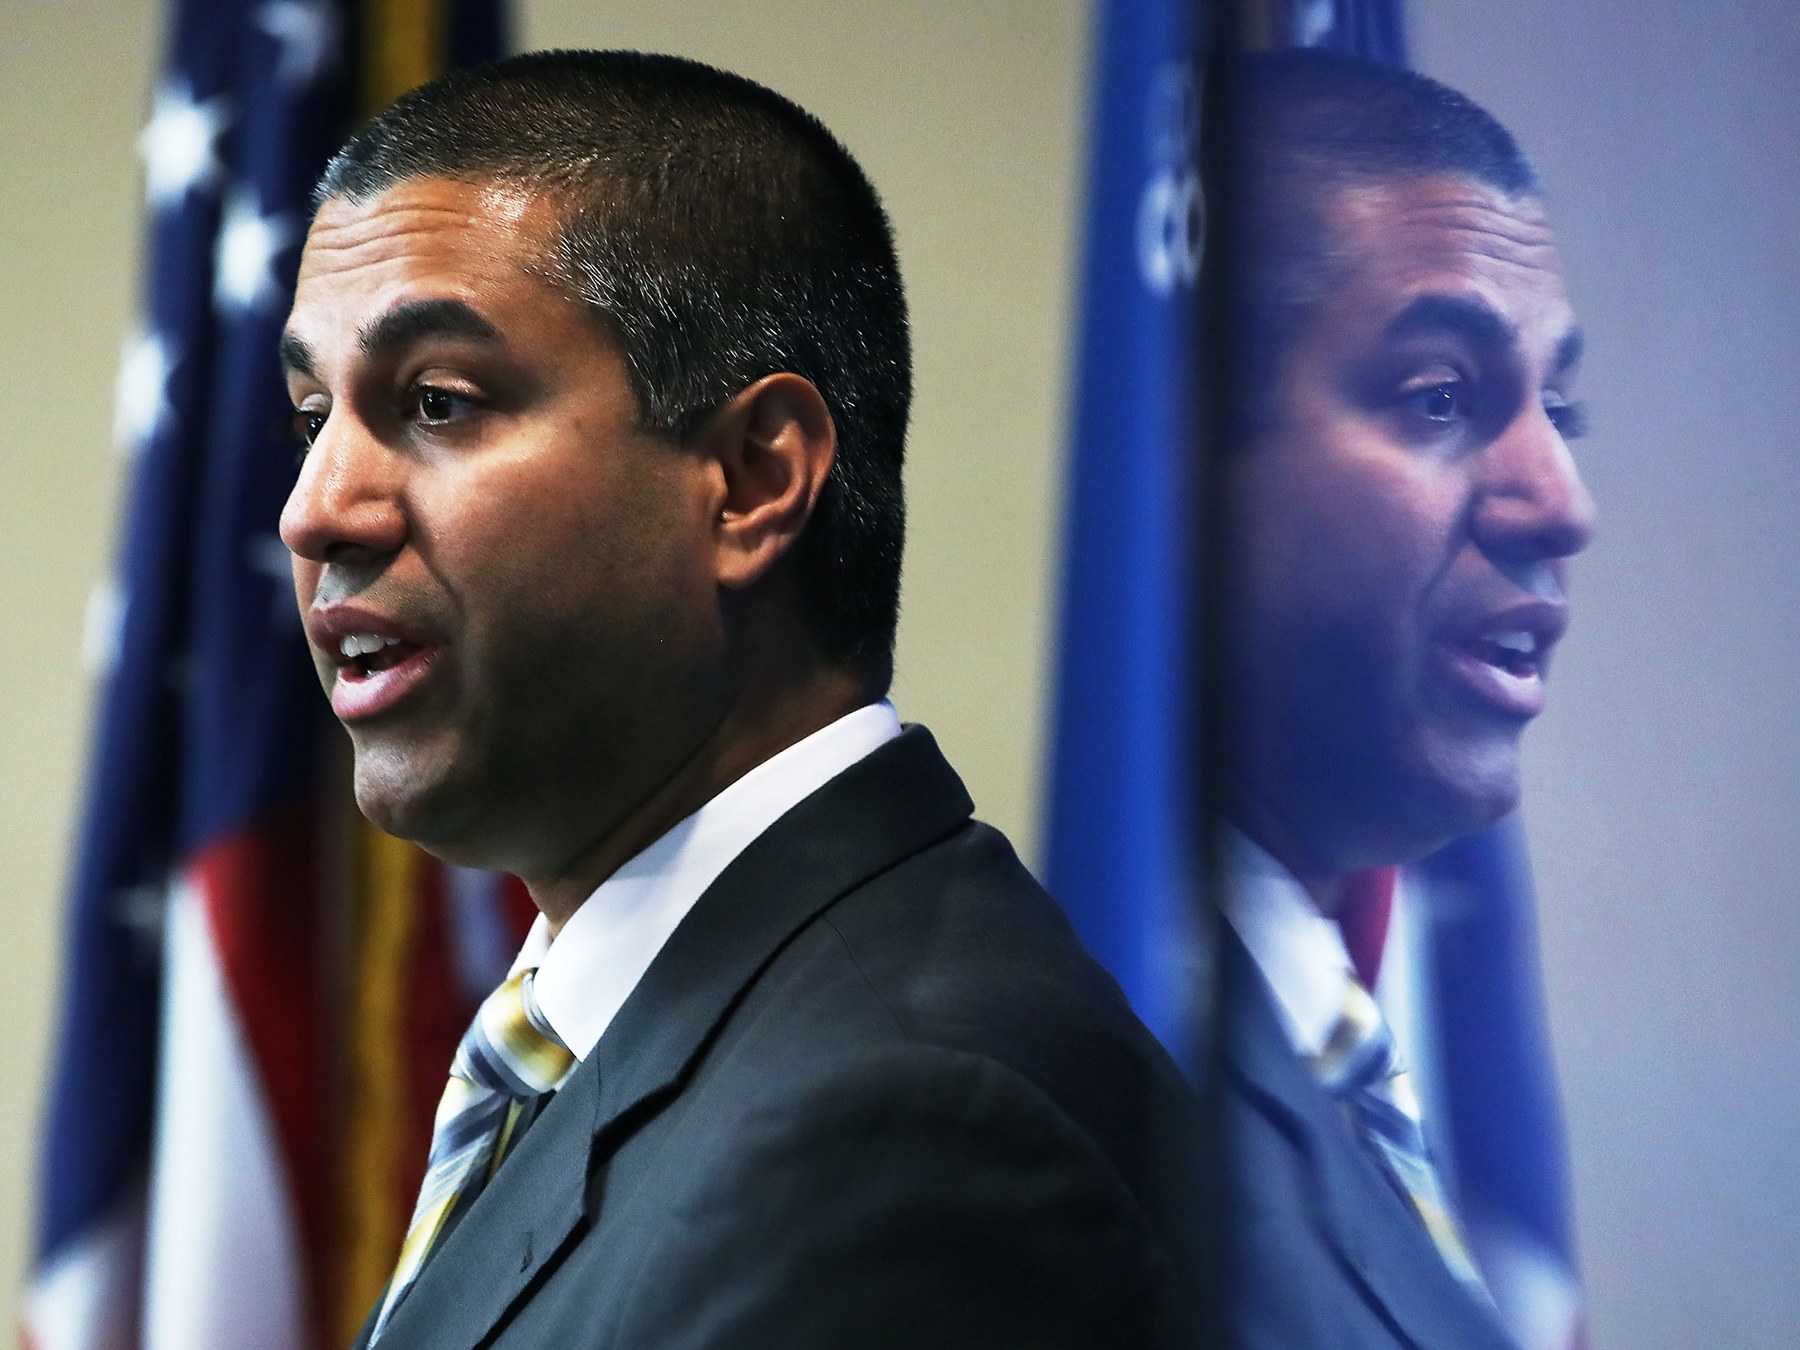 CAN THE FCC REALLY BLOCK CALIFORNIA’S NET NEUTRALITY LAW?